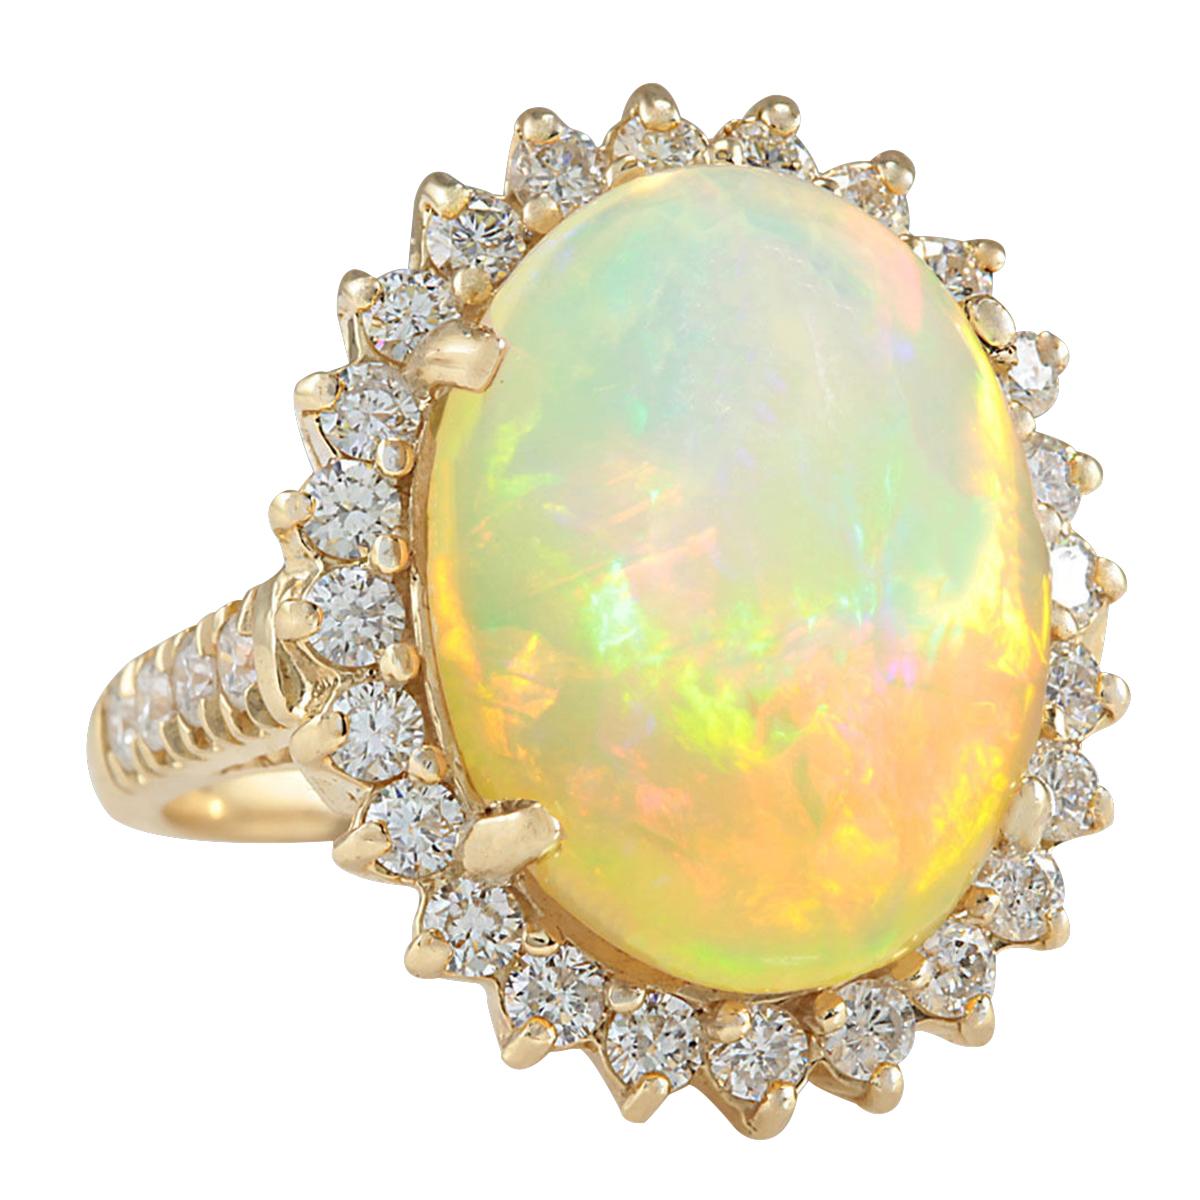 Stamped: 14K Yellow Gold
Total Ring Weight: 6.0 Grams
Total Natural Opal Weight is 7.38 Carat (Measures: 18.00x13.00 mm)
Color: Multicolor
Total Natural Diamond Weight is 1.50 Carat
Color: F-G, Clarity: VS2-SI1
Face Measures: 23.25x19.13 mm
Sku: